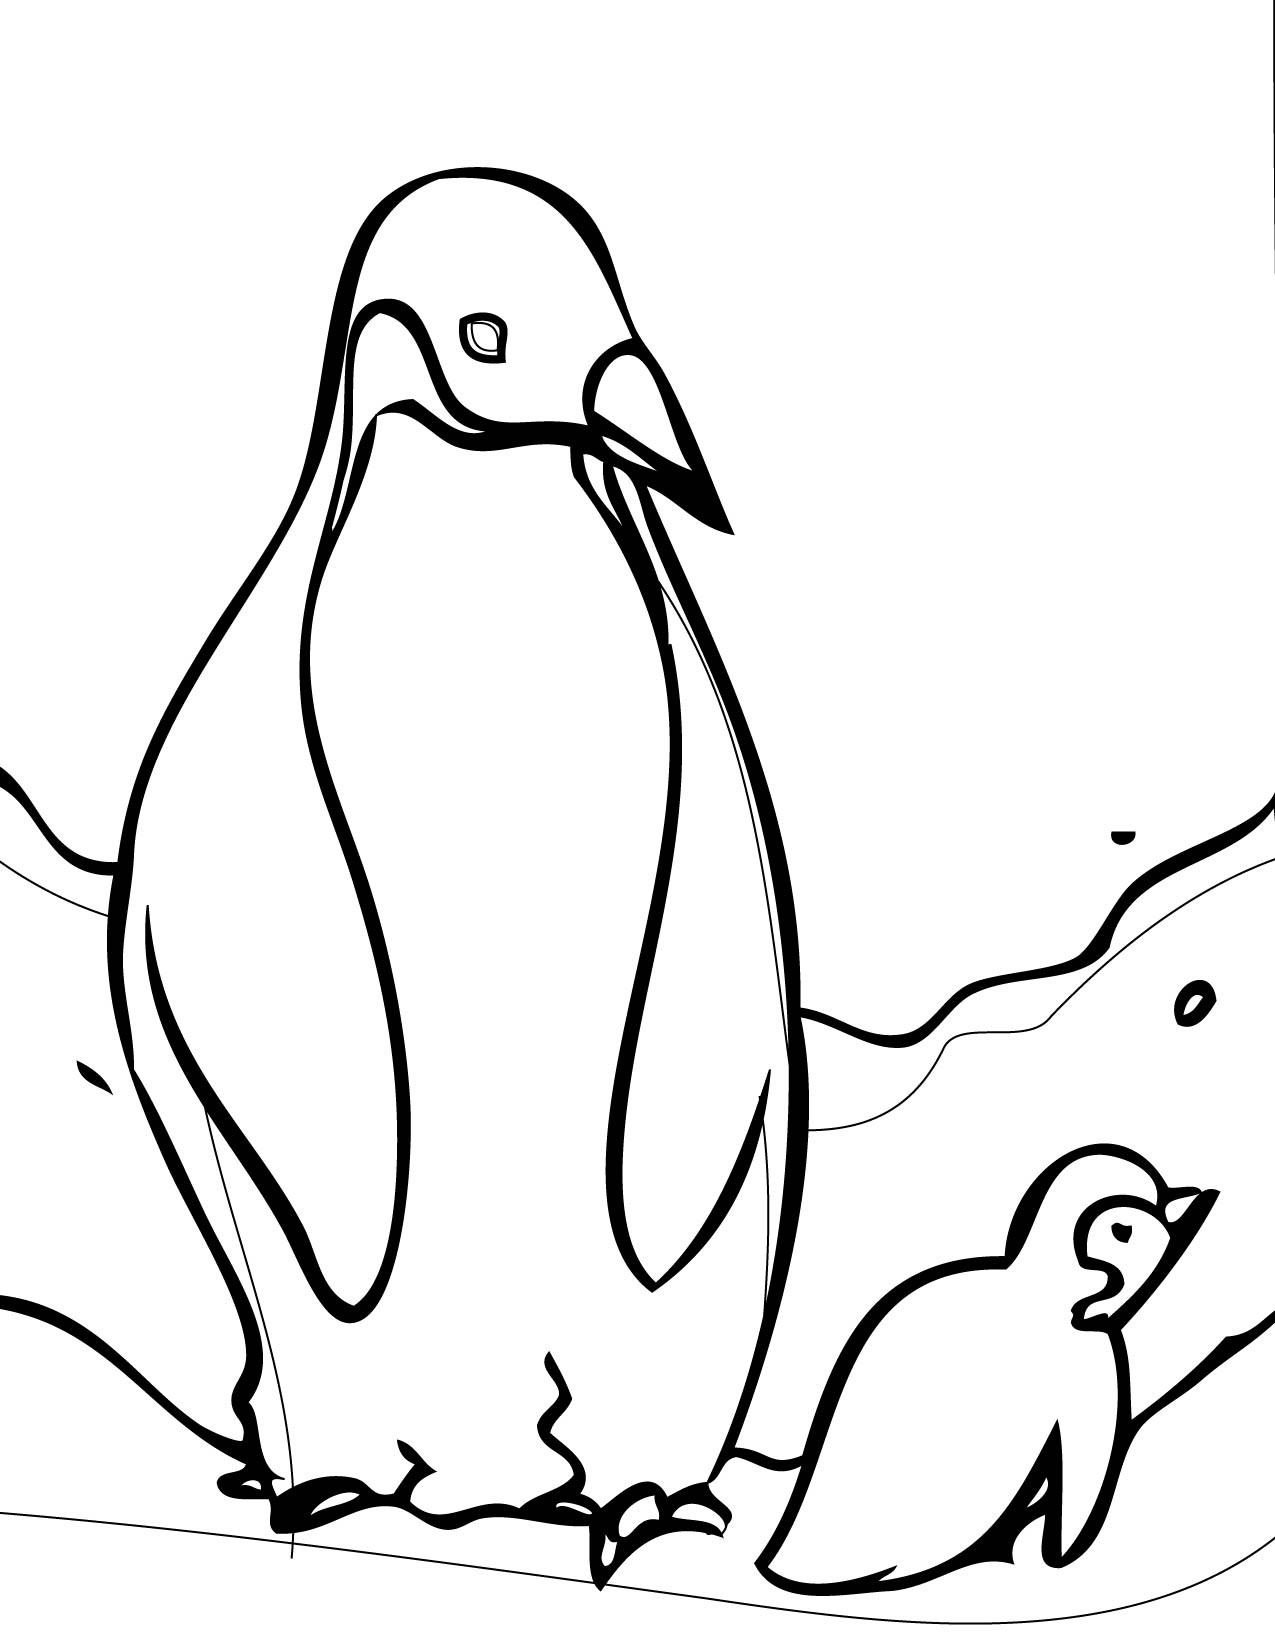 Penguin Coloring Page Coloring Print